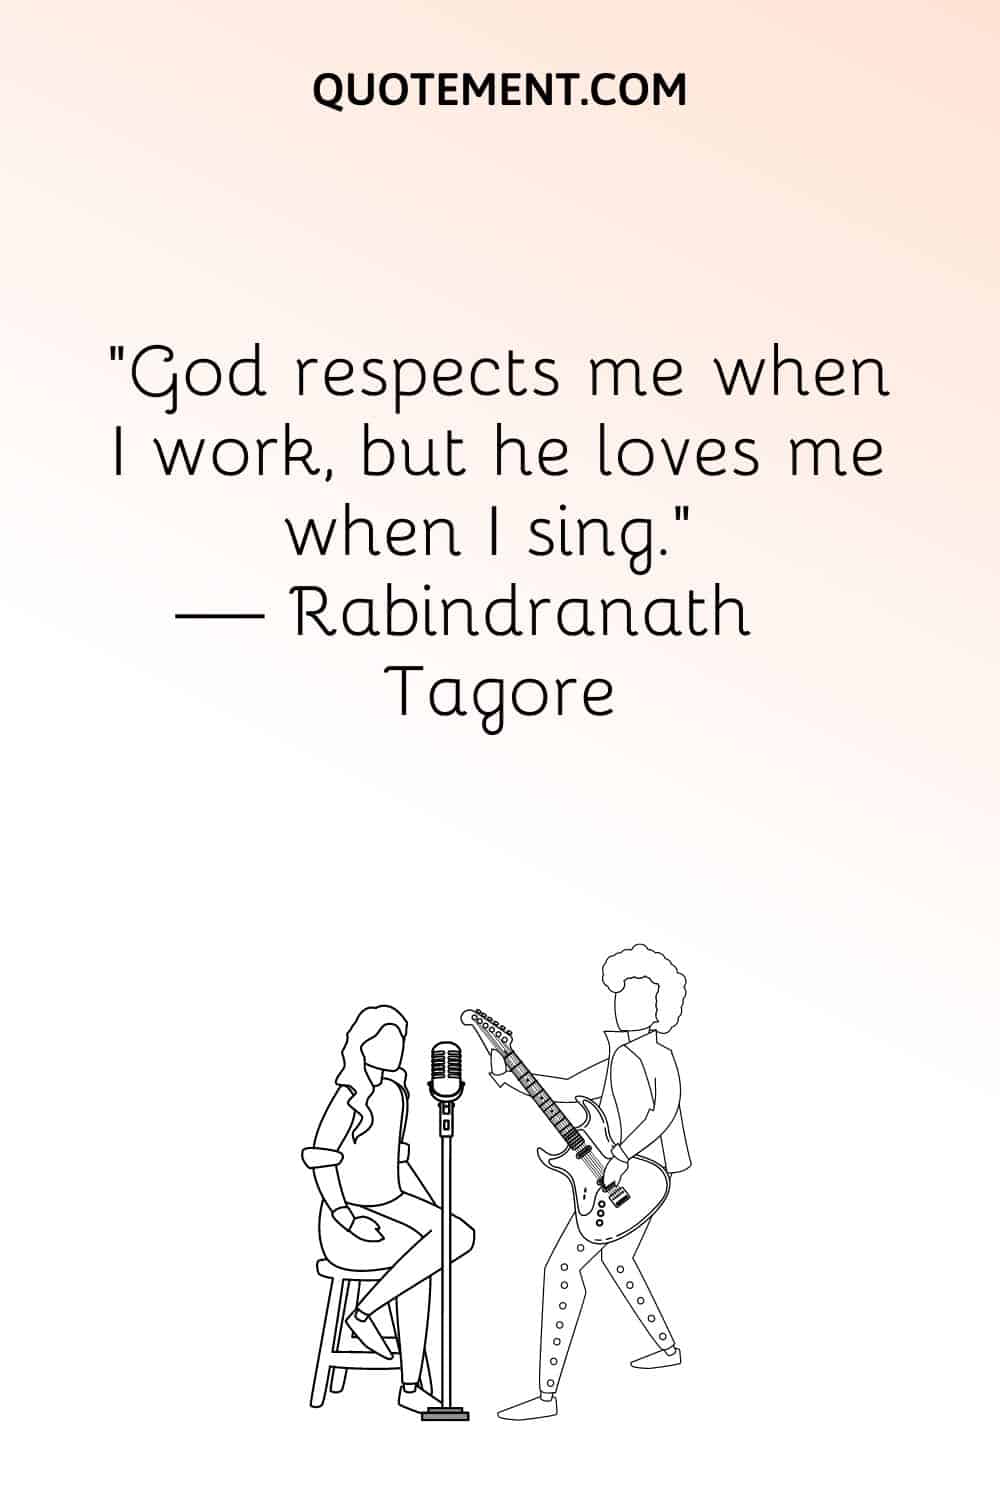 “God respects me when I work, but he loves me when I sing.” — Rabindranath Tagore